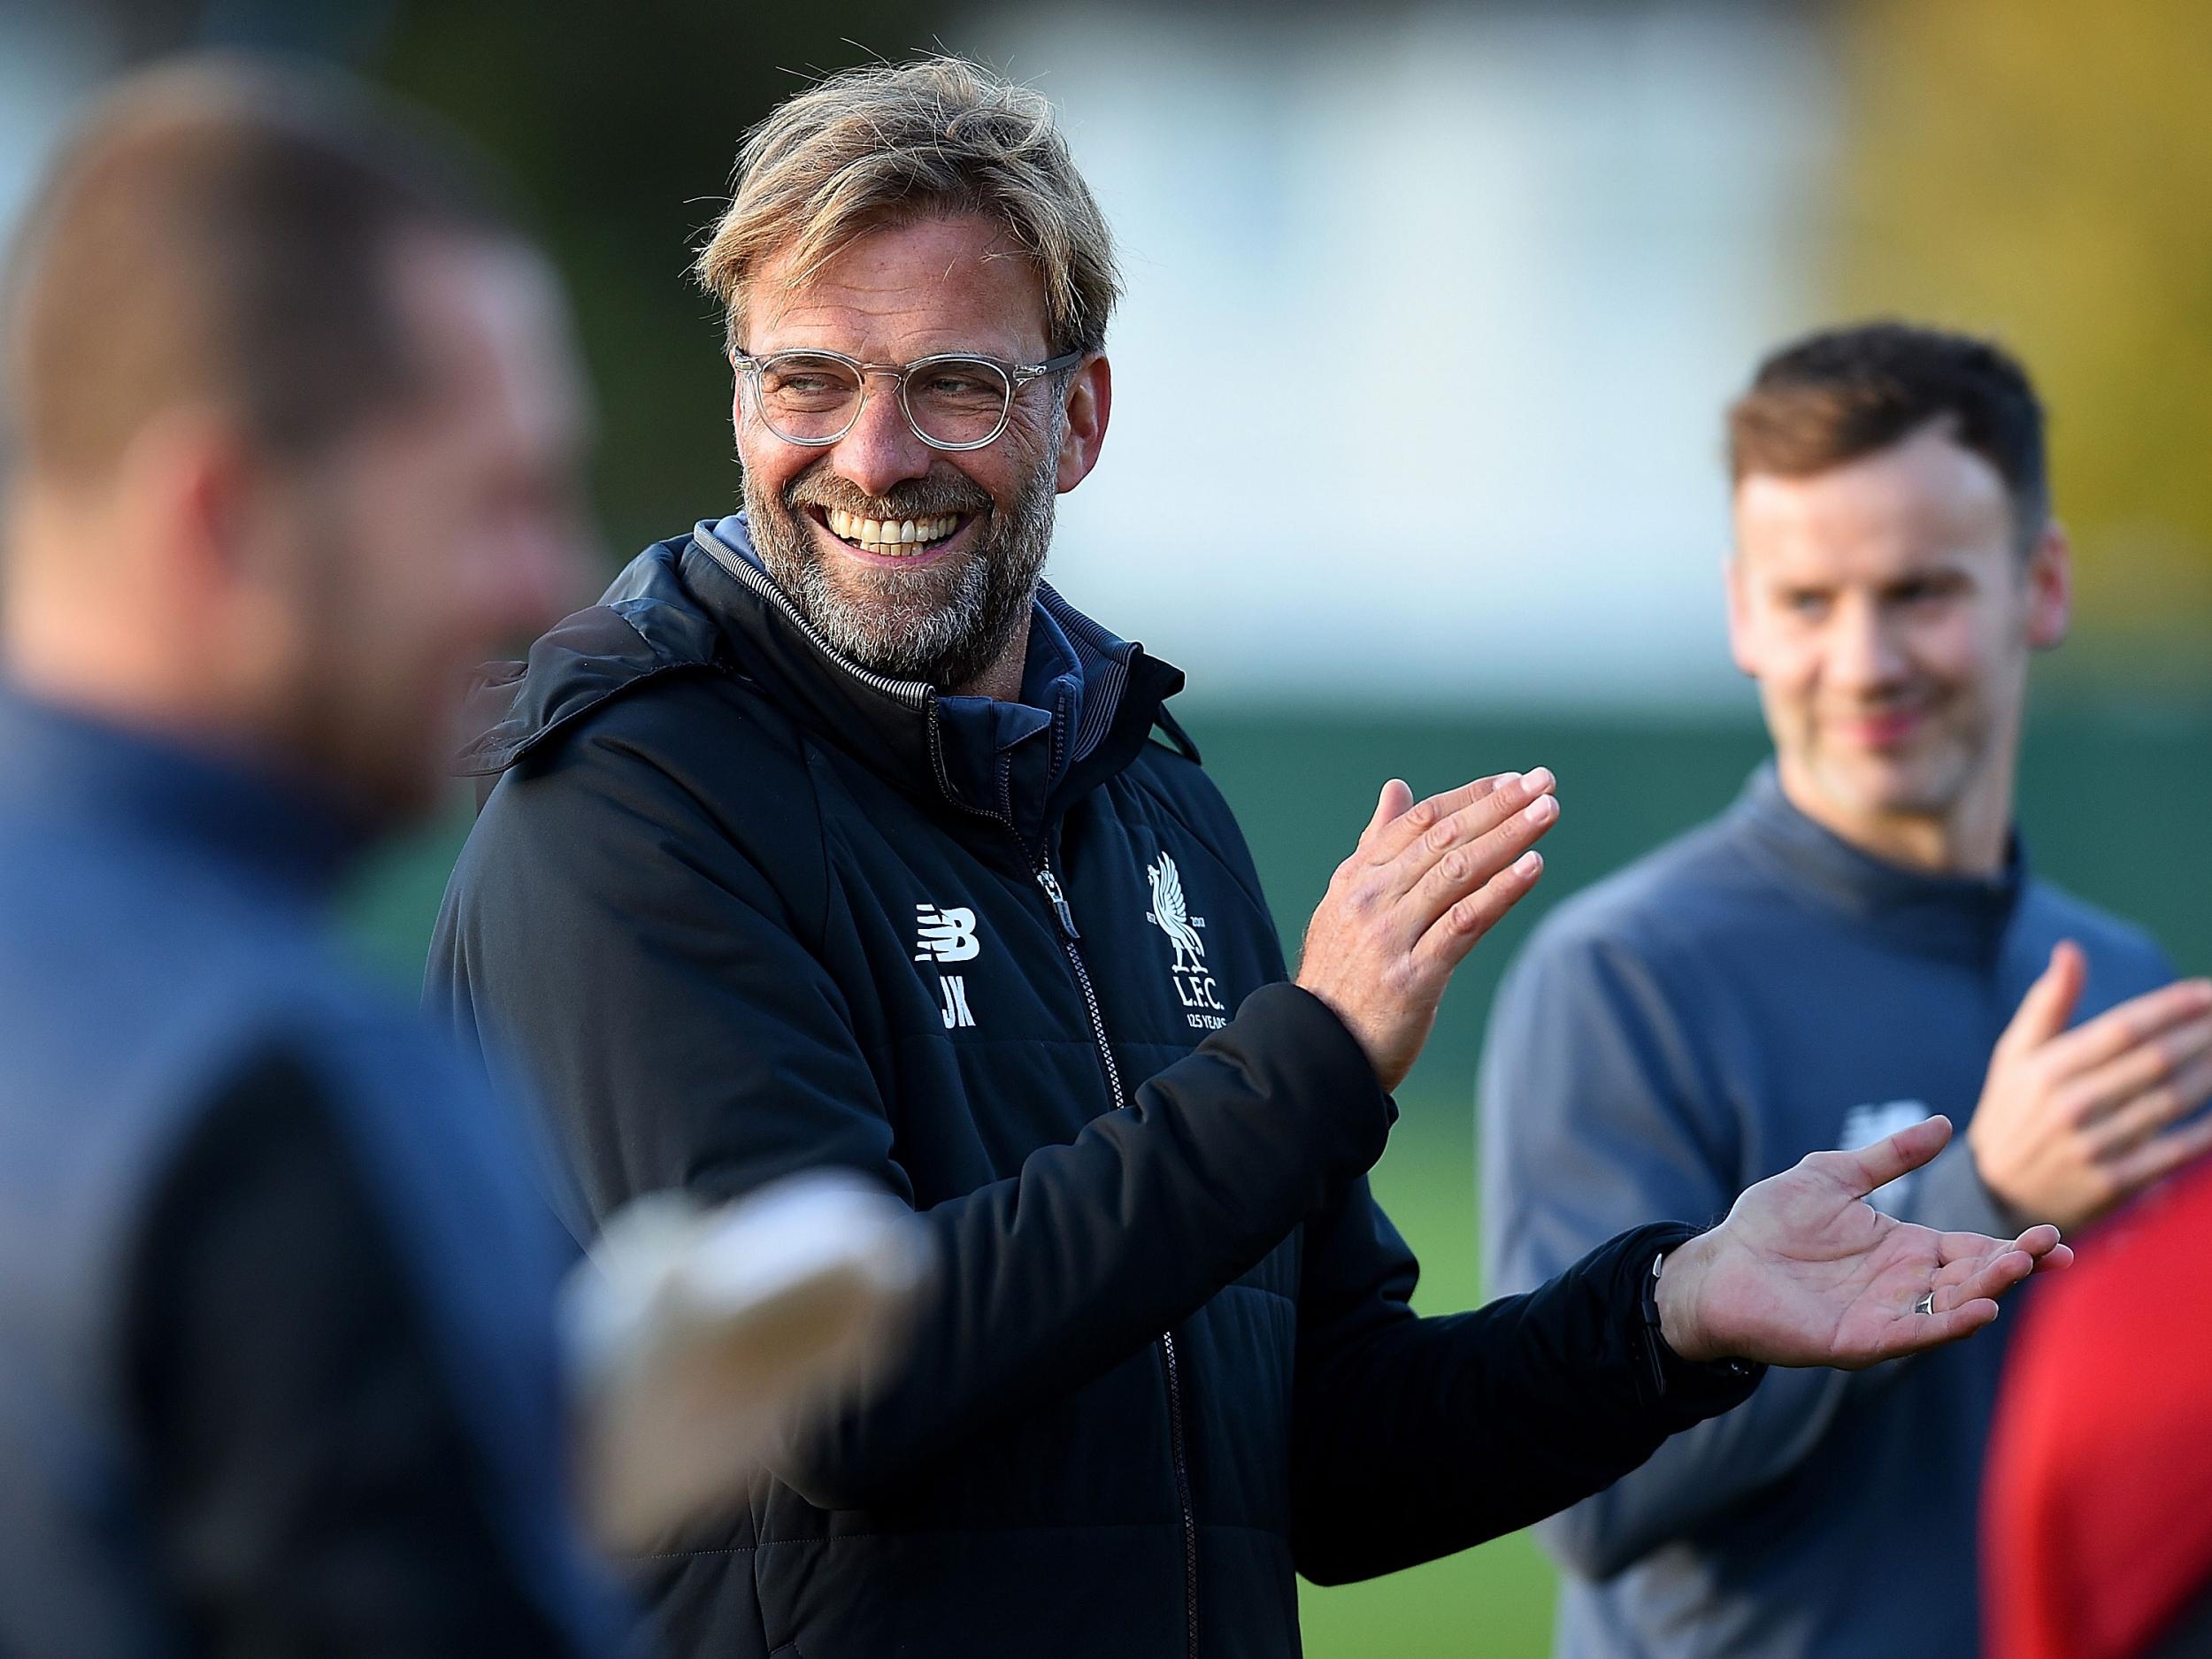 Jürgen Klopp suffered a slight health scare earlier this week and missed training